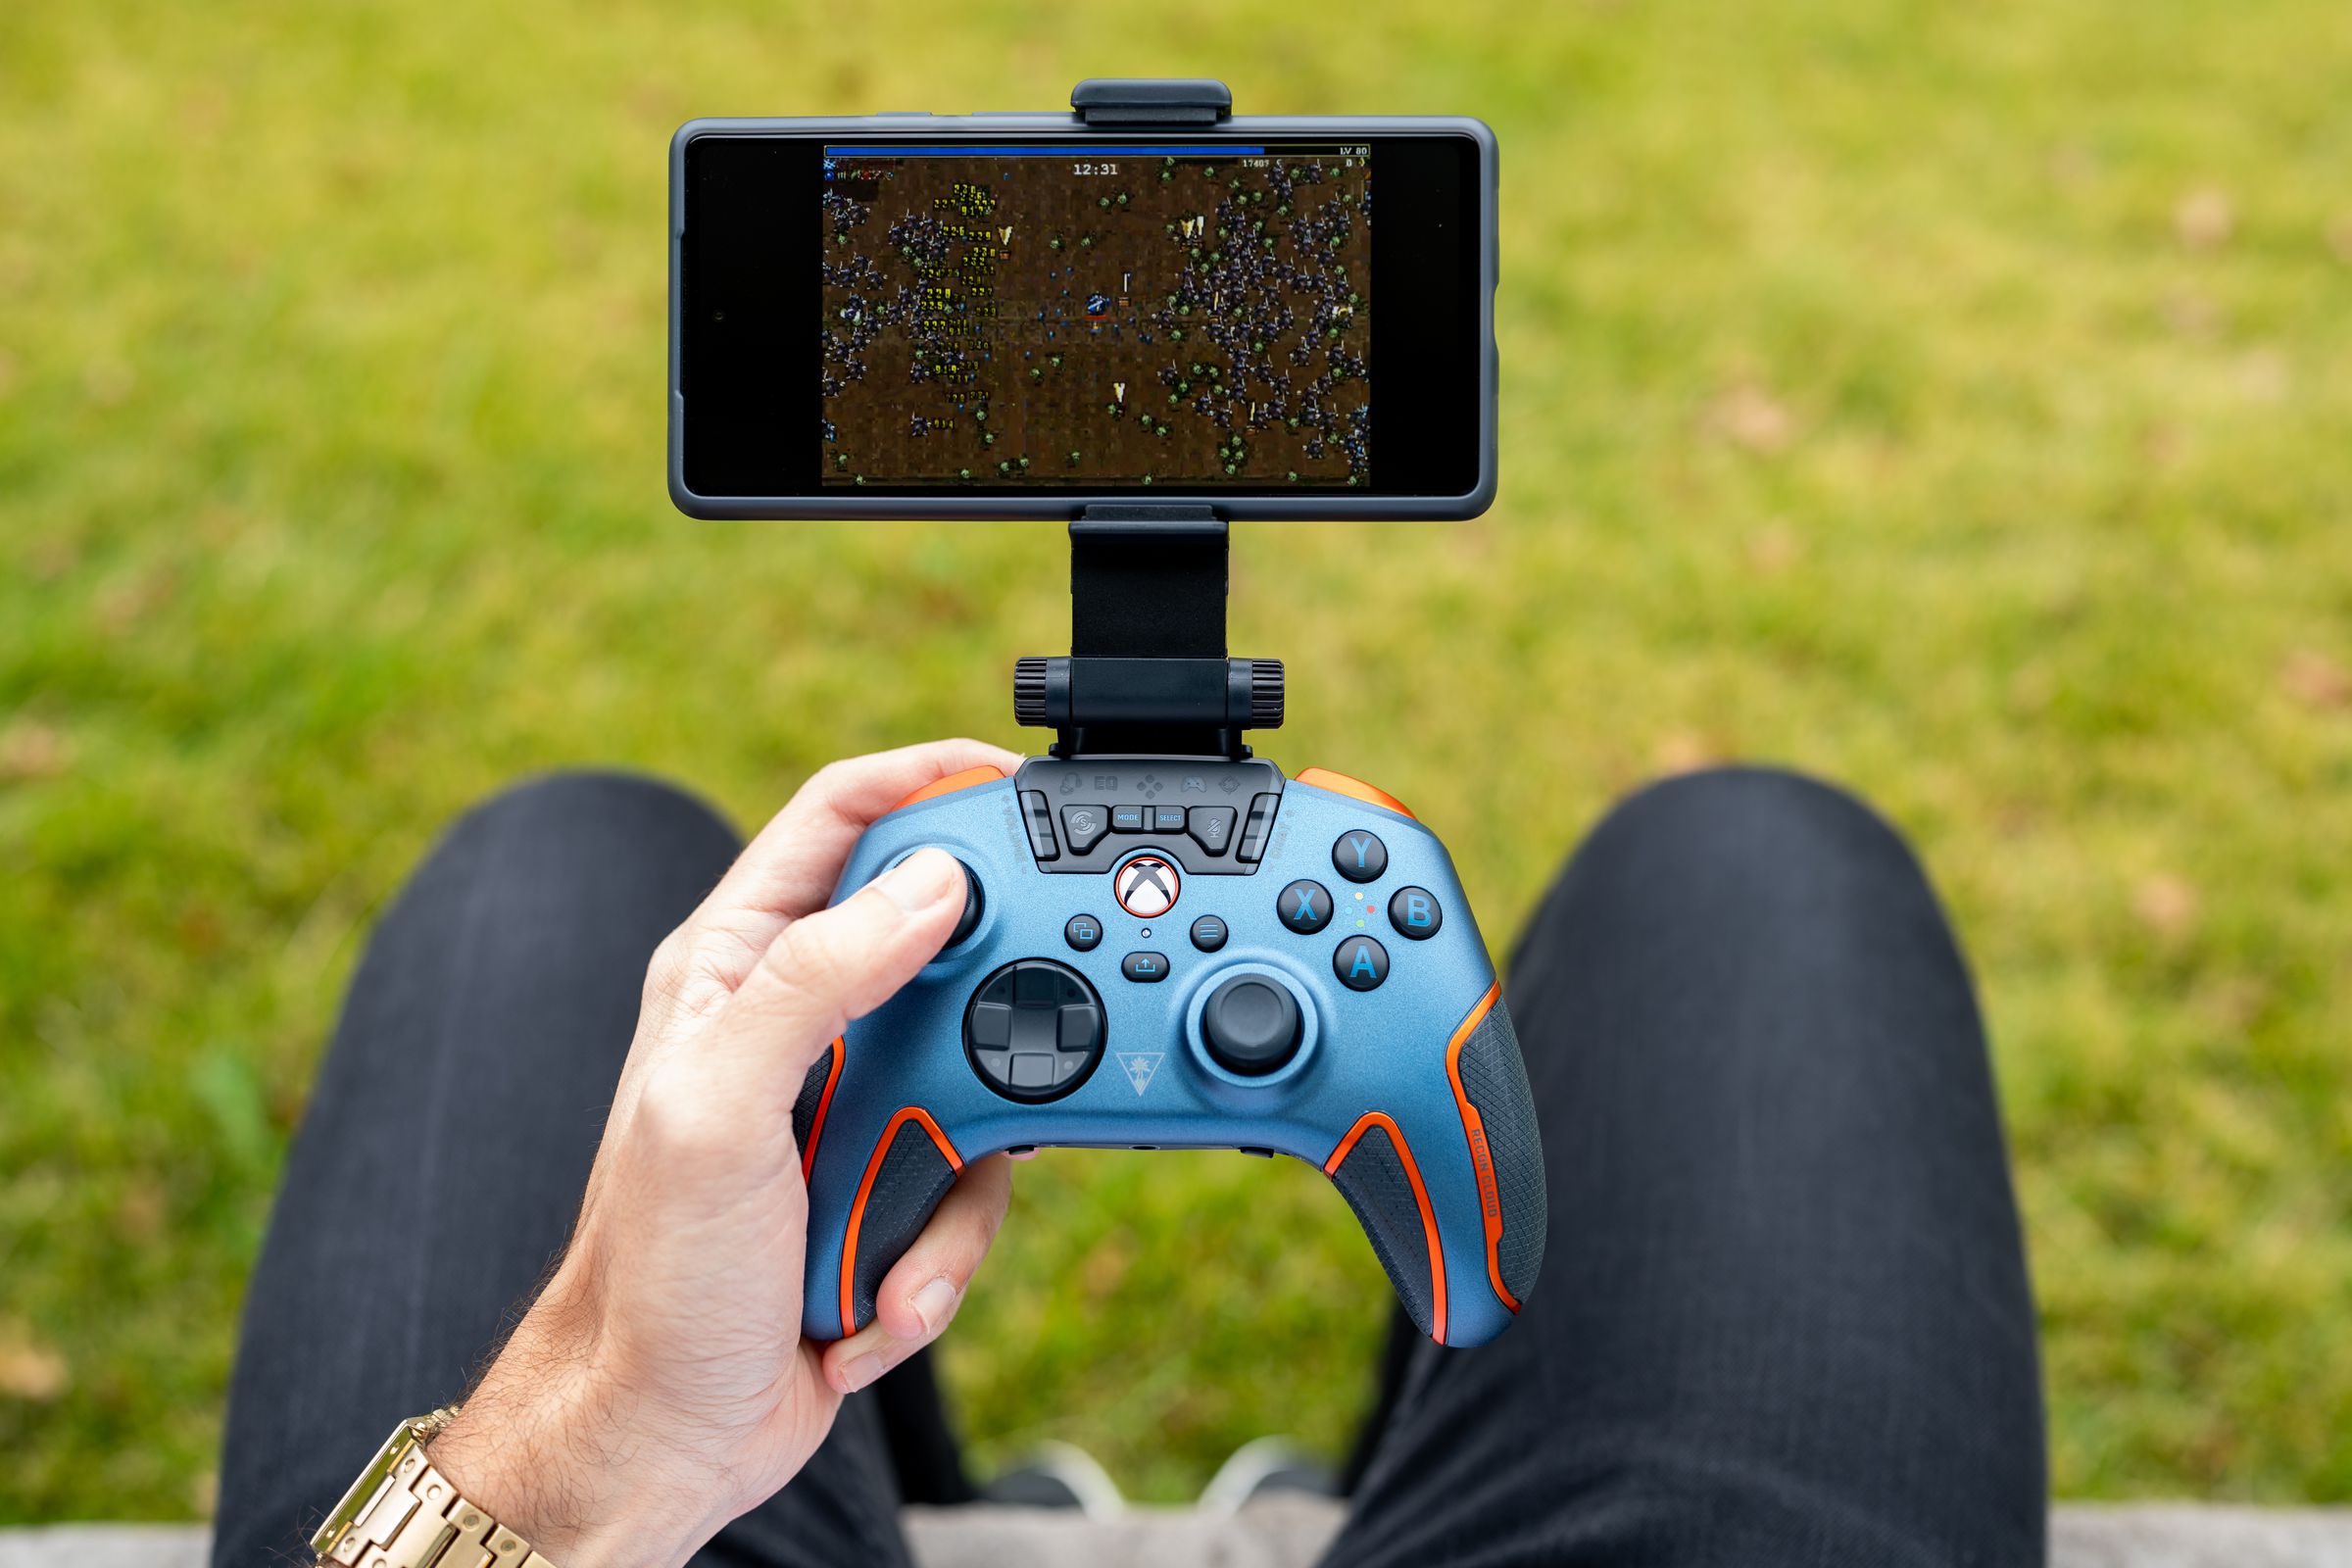 A person holding the blue and orange Turtle Beach Recon Cloud controller above their lap while outside in front of green grass. The controller has a smartphone mounted to its top, streaming a game from the cloud.